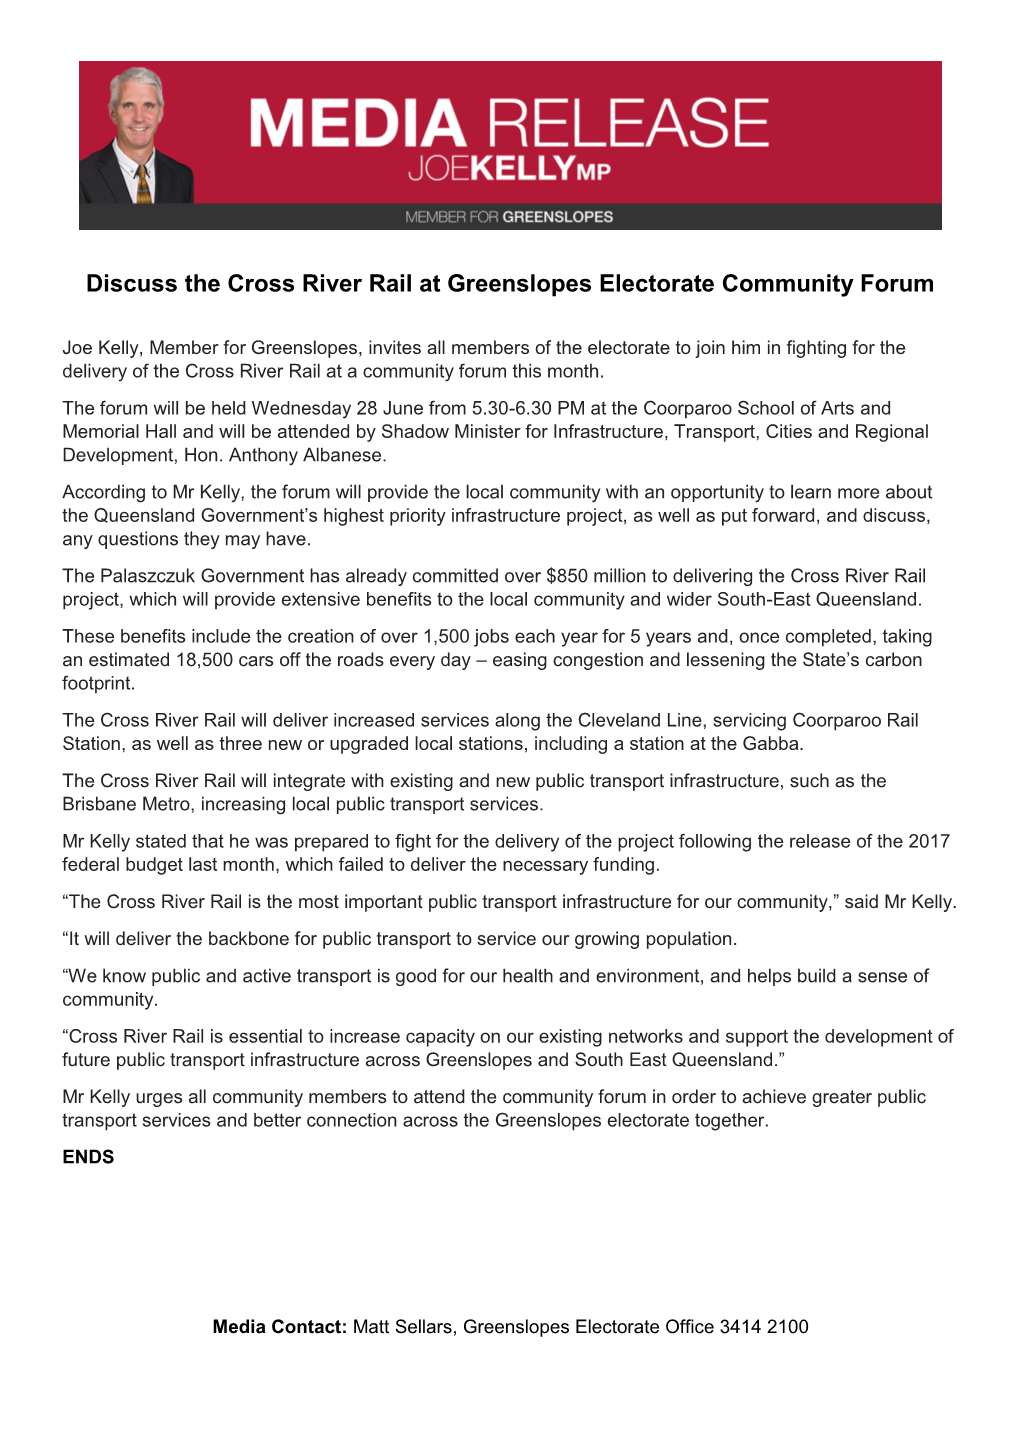 Discuss the Cross River Rail at Greenslopes Electorate Community Forum